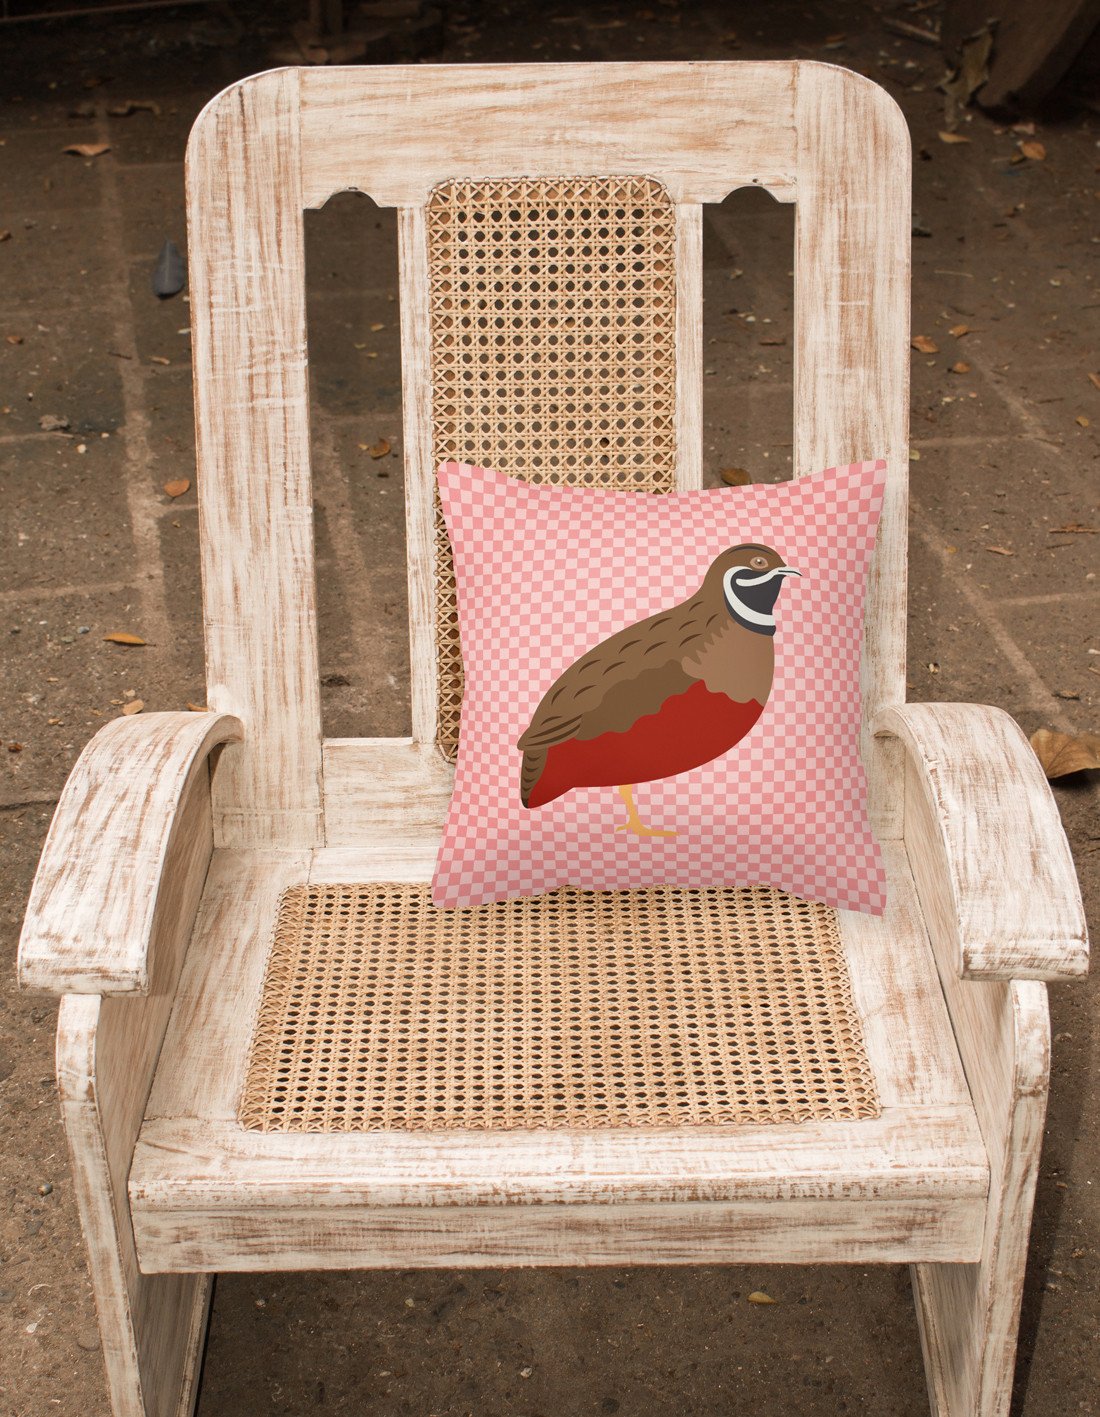 Chinese Painted or King Quail Pink Check Fabric Decorative Pillow BB7956PW1818 by Caroline's Treasures